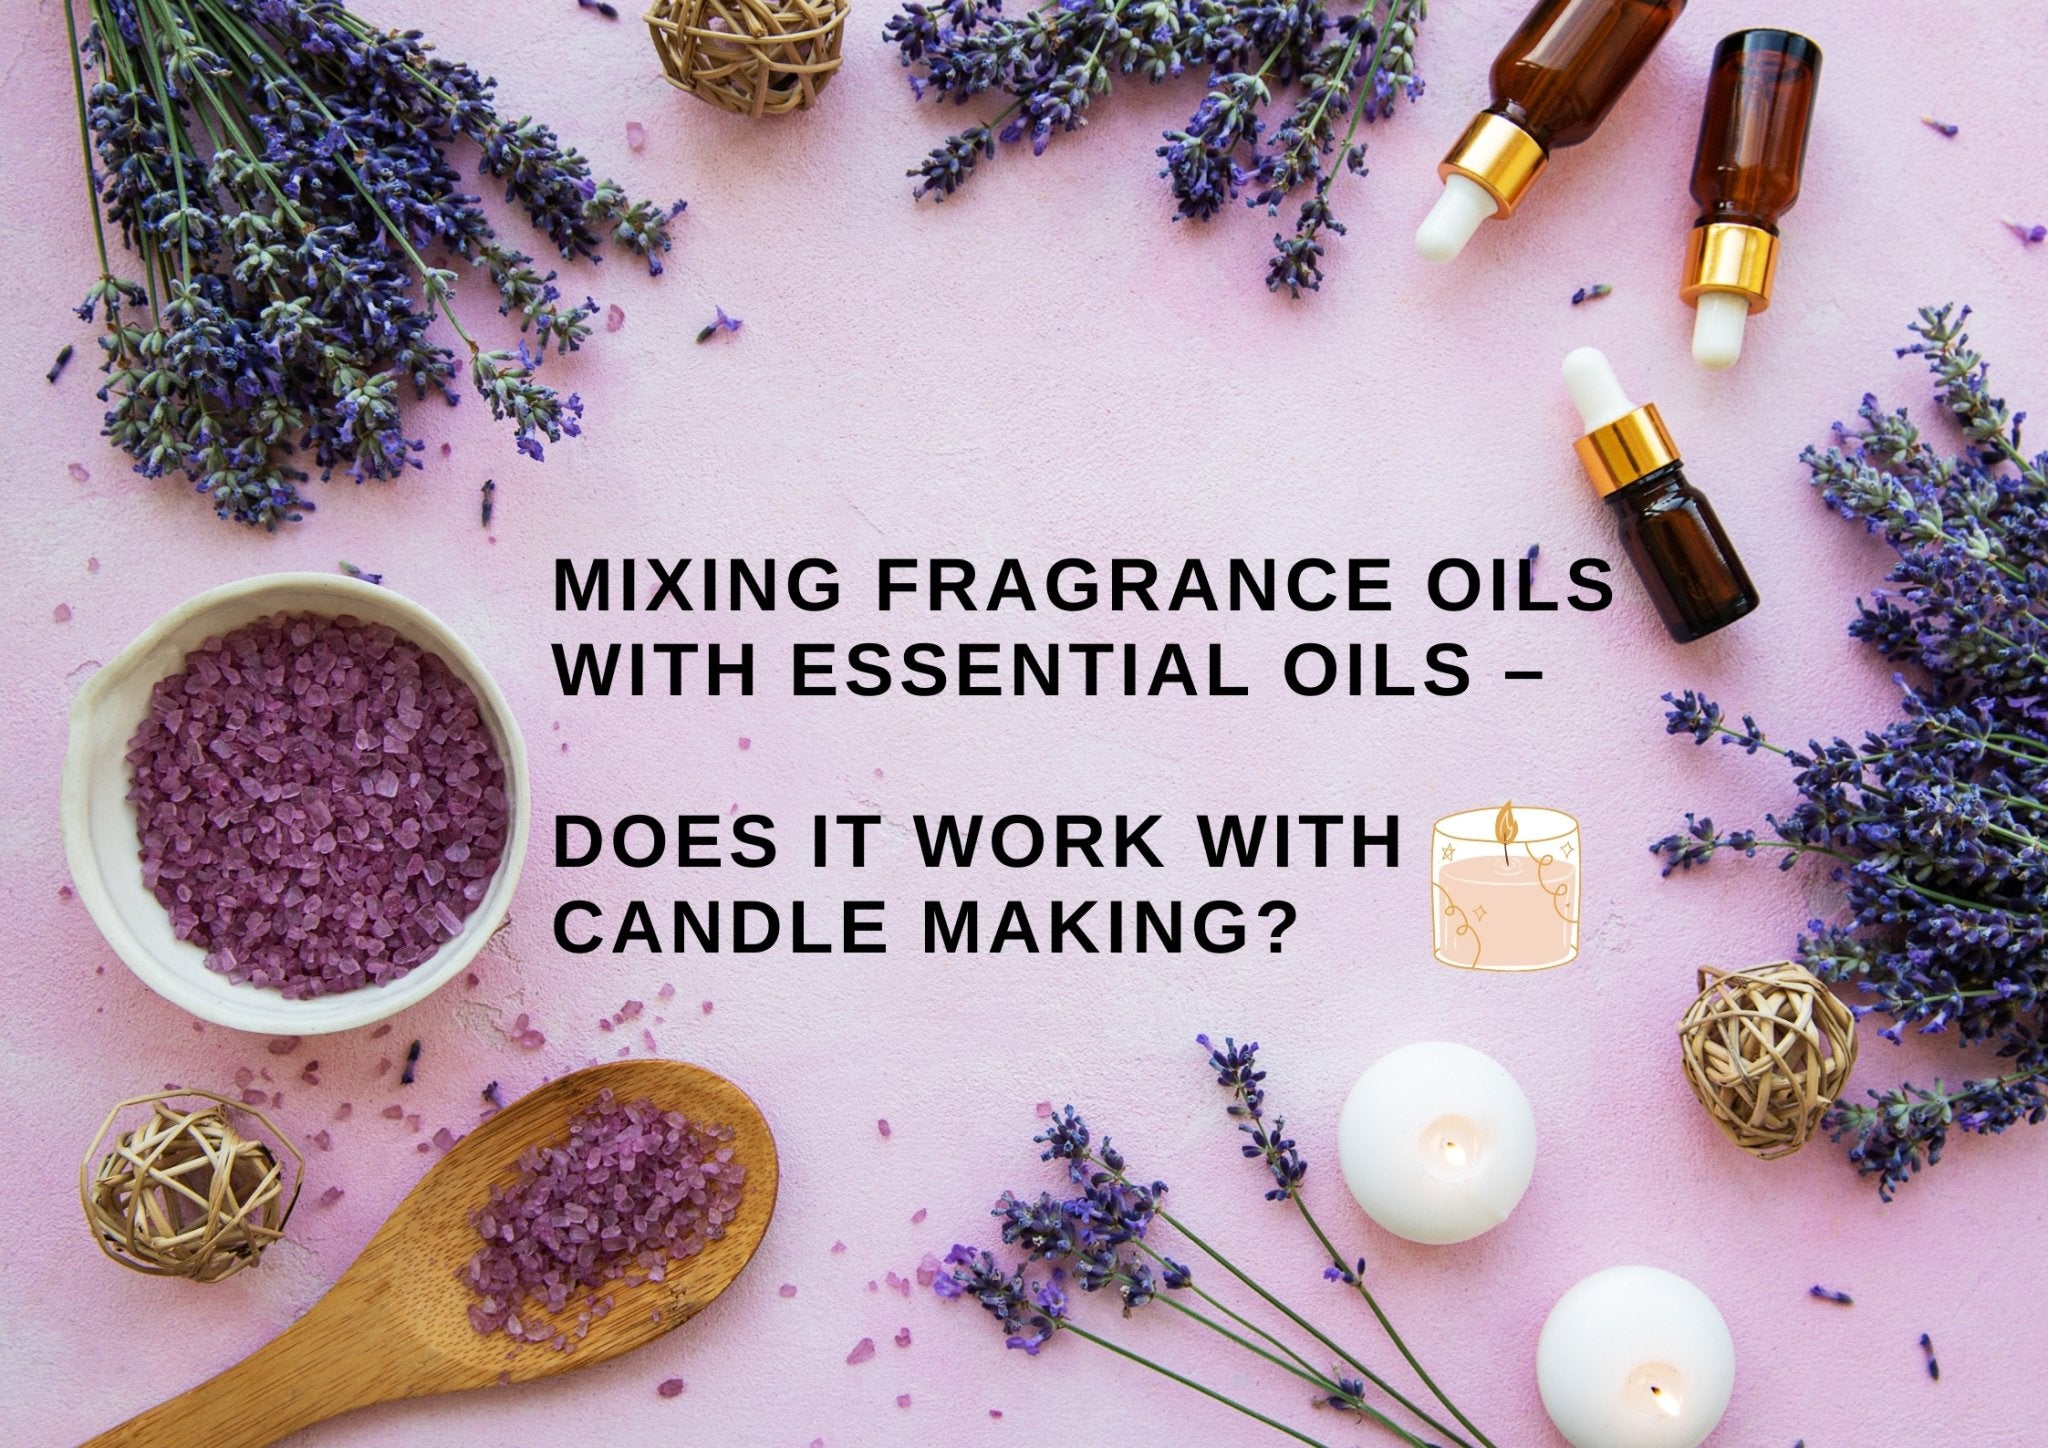 Candle Fragrance Oils: How to Add Fragrance Oil to Your Candle